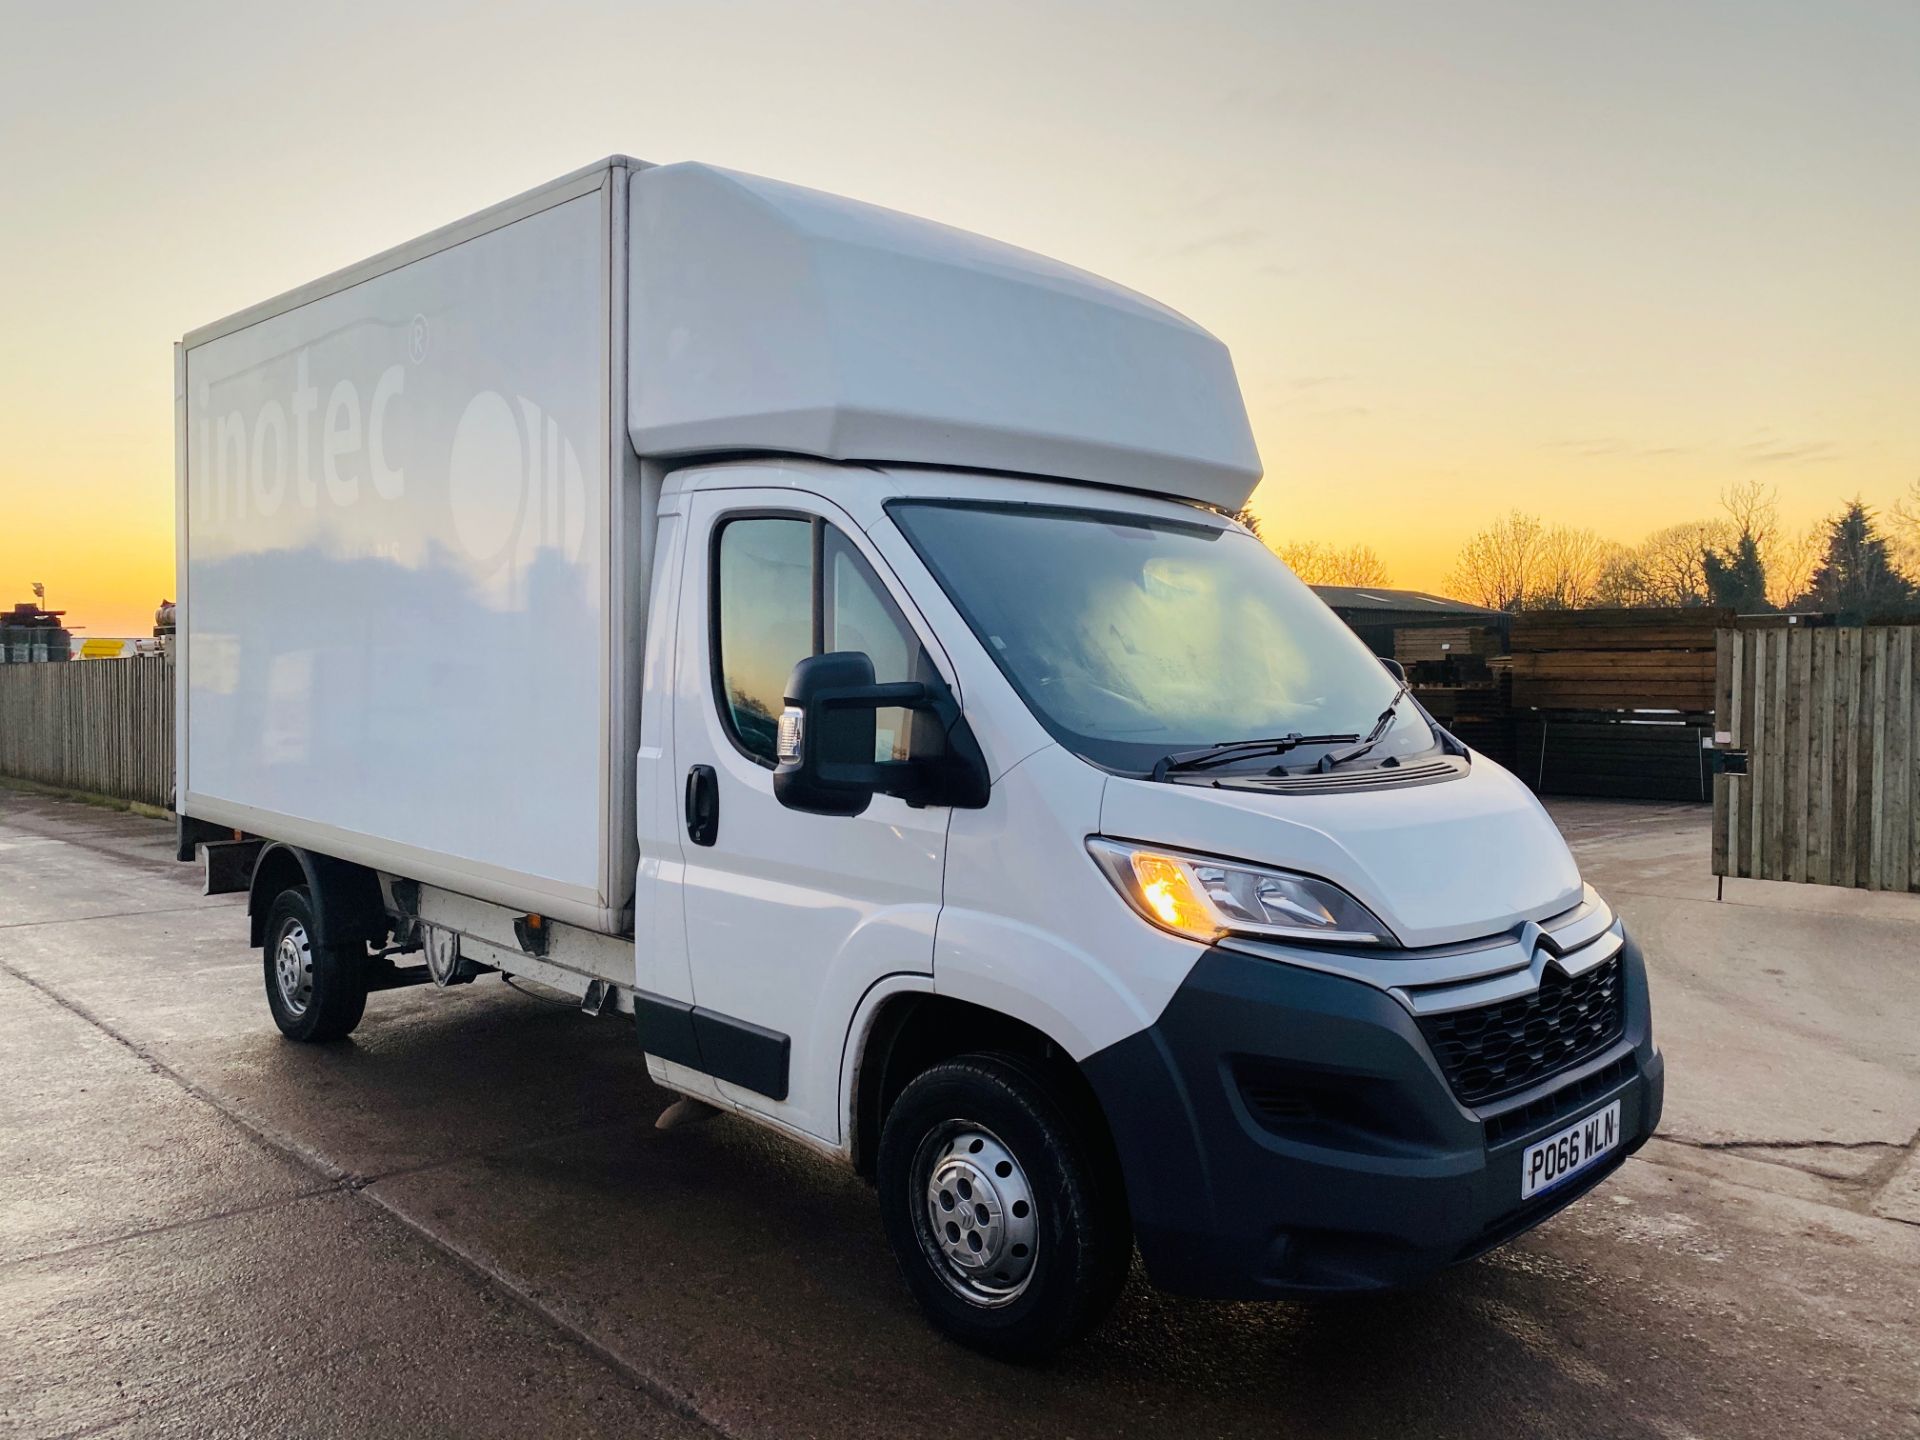 CITROEN RELAY 2.2HDI "LWB" LUTON BOX VAN WITH ELECTRIC TAIL LIFT - 2017 MODEL - EURO 6 - 1 KEEPER - Image 5 of 17